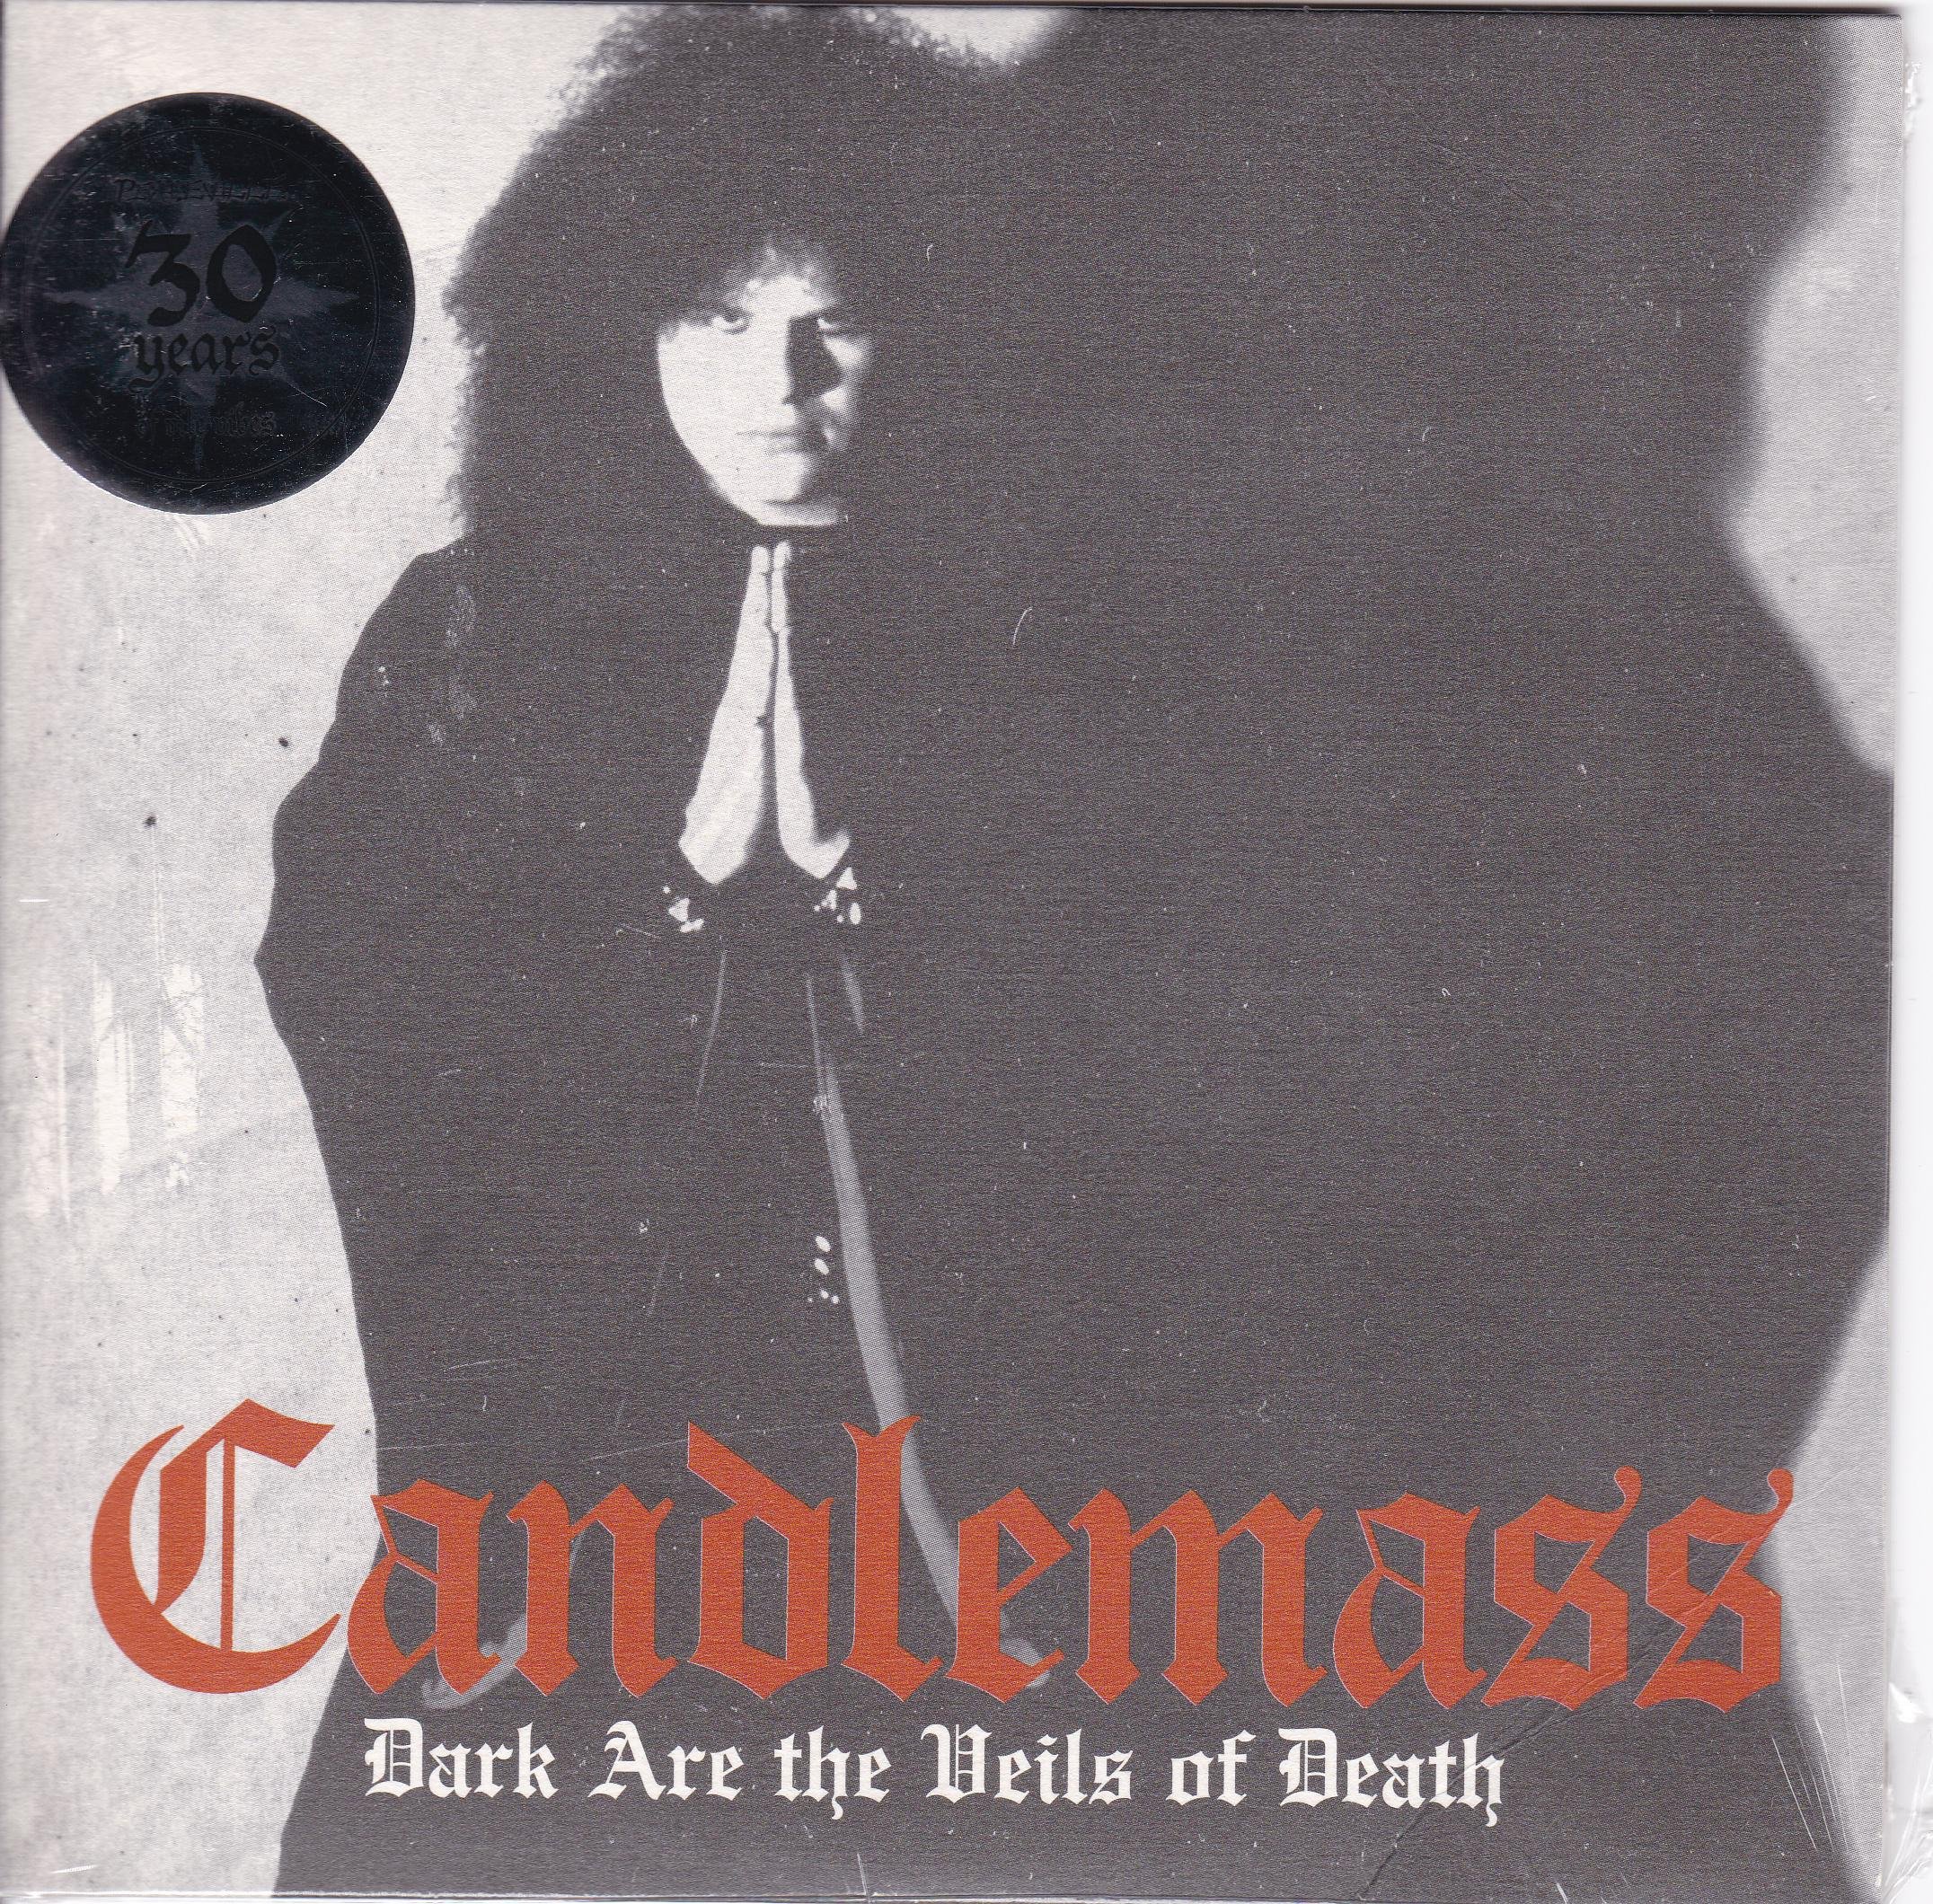 Dark are the Veils of Death — Candlemass | Last.fm